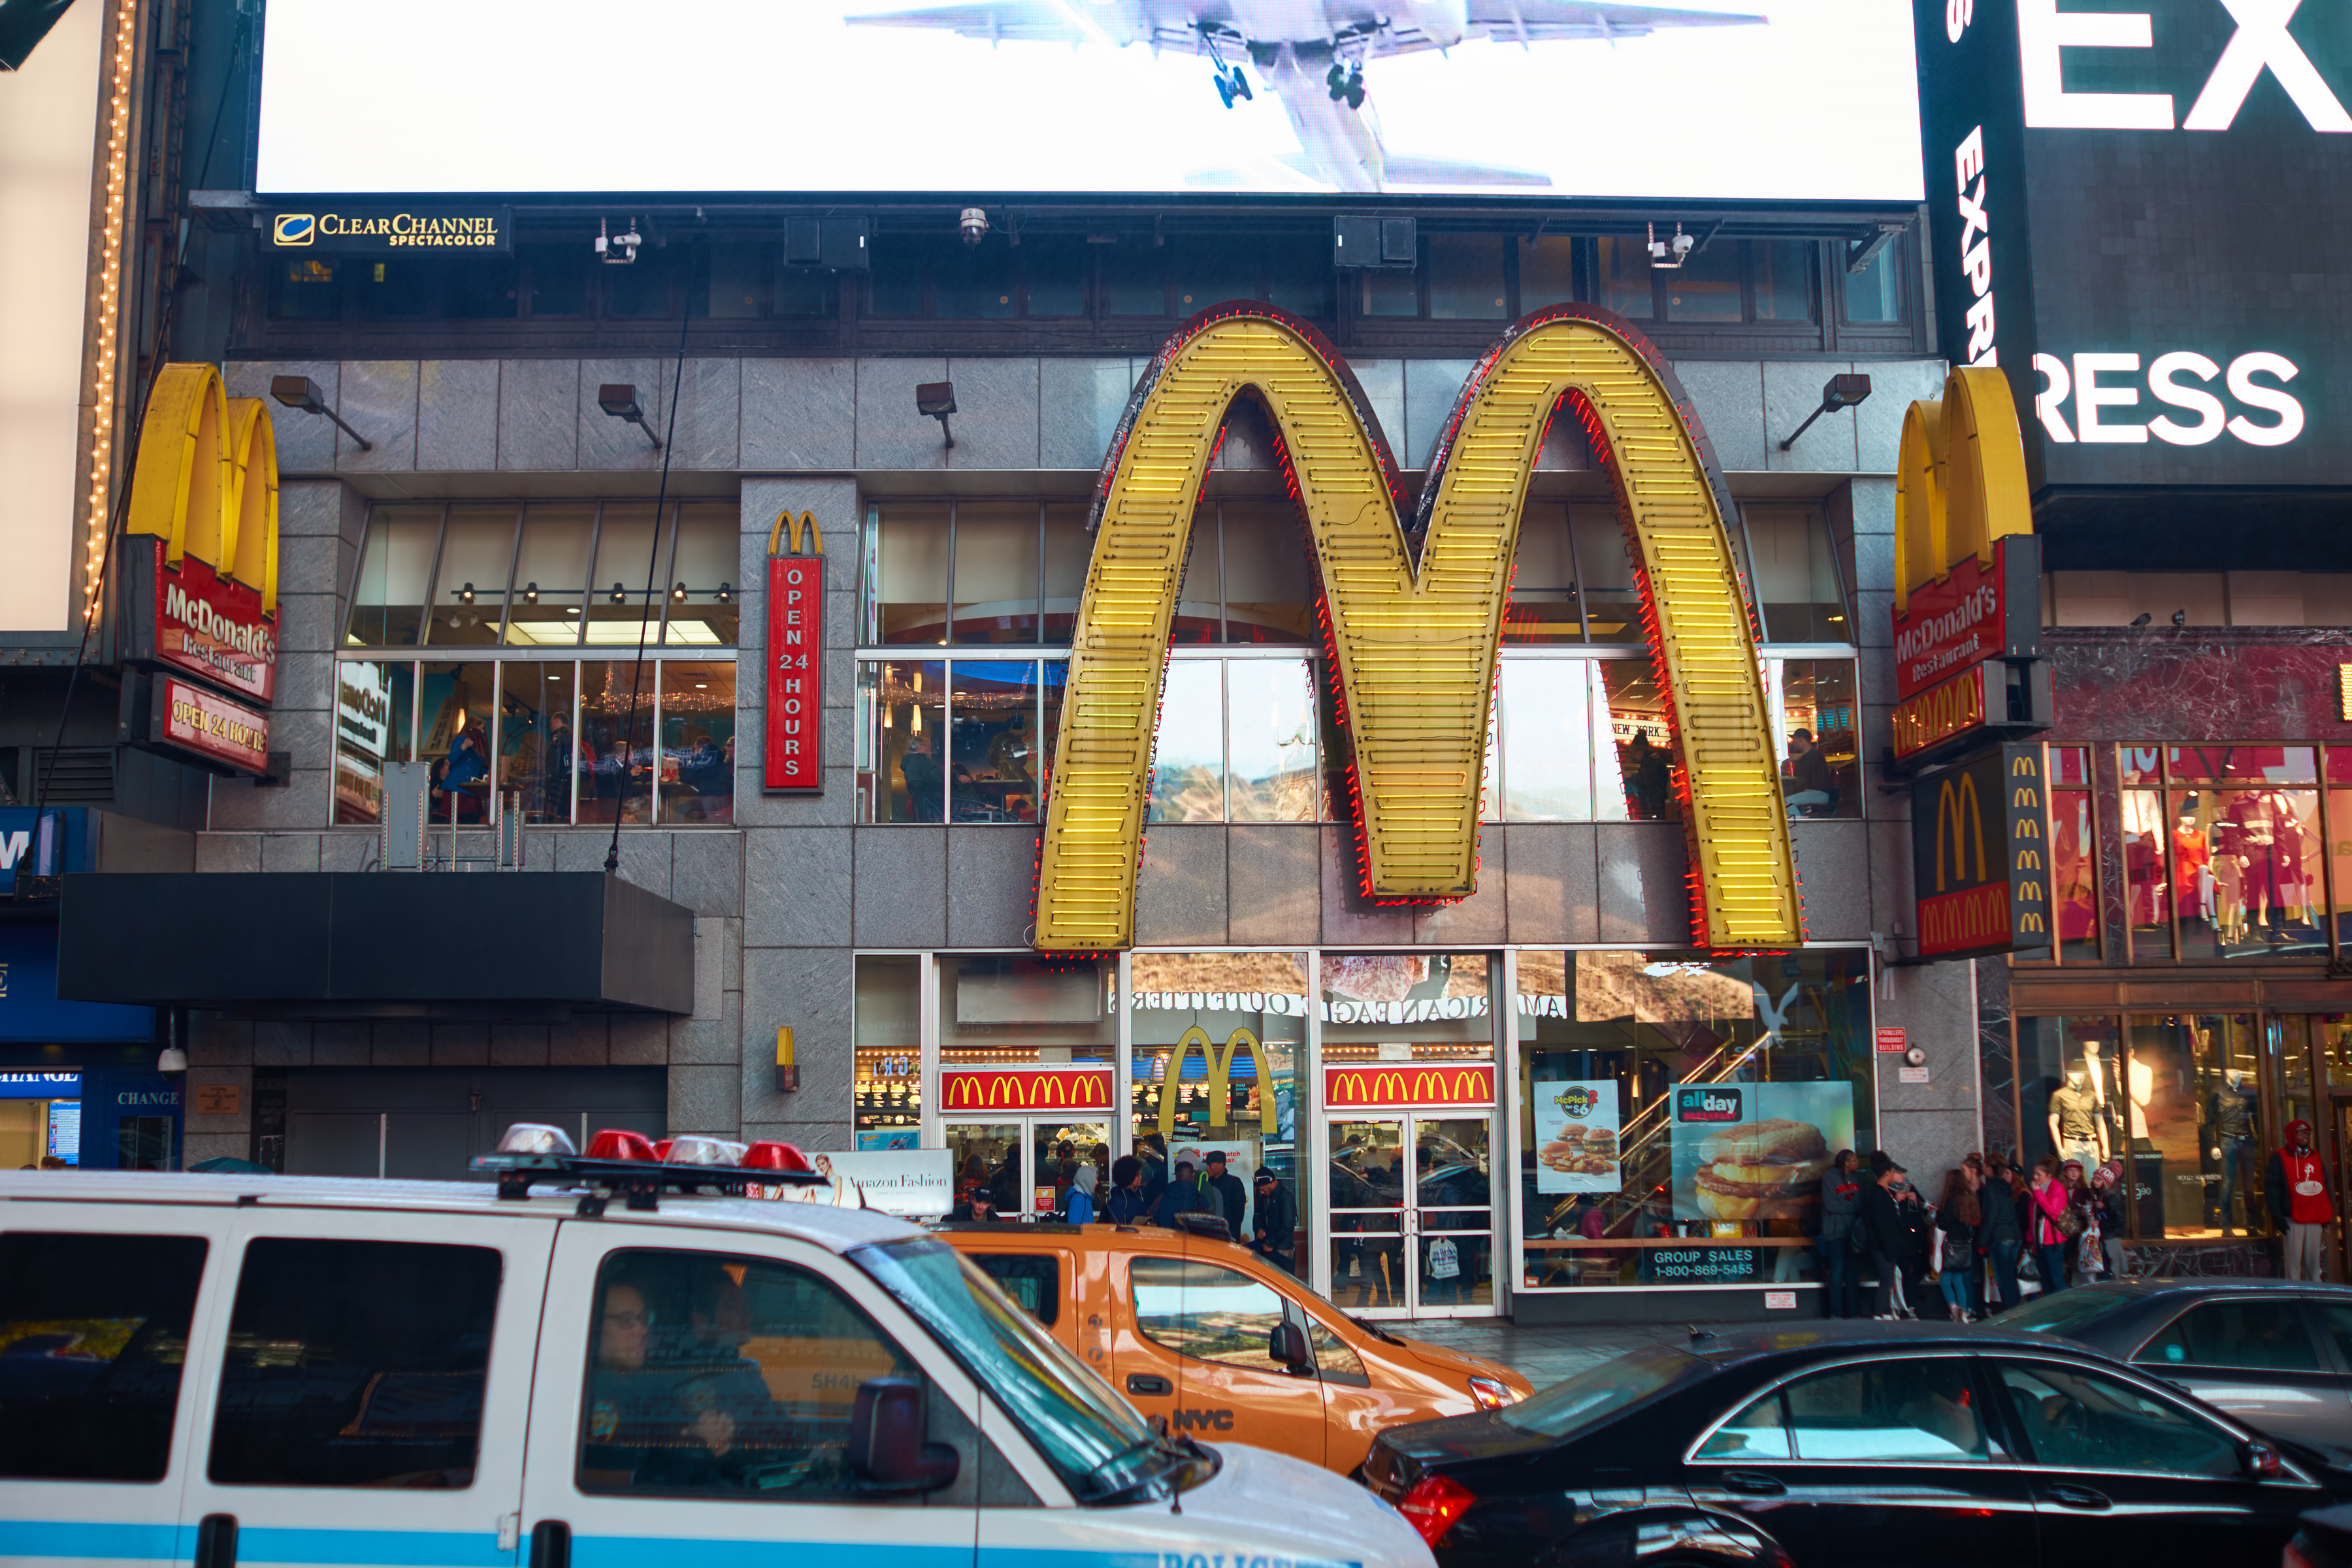 McDonald’s in Times Square